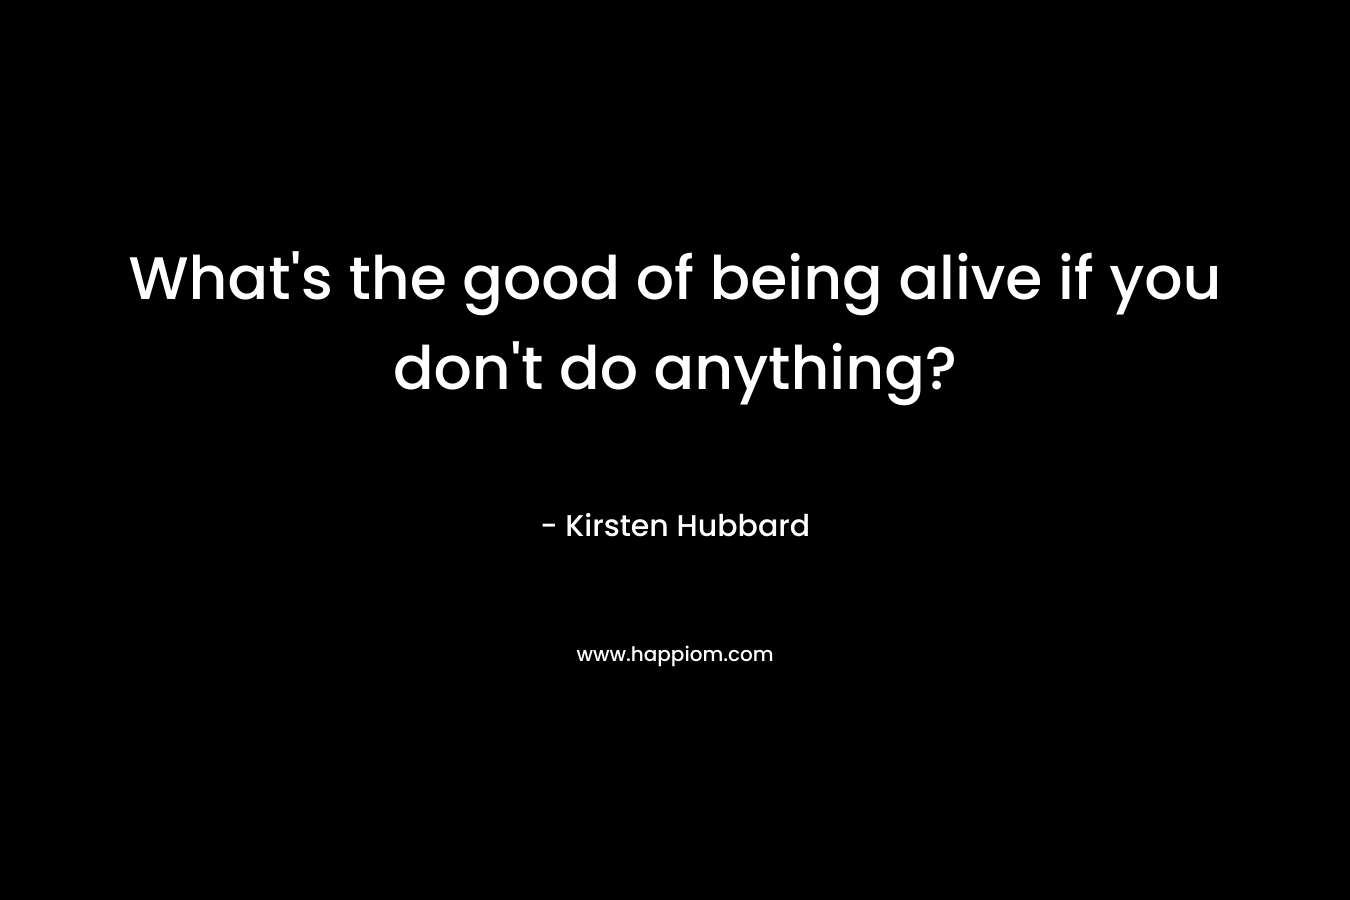 What's the good of being alive if you don't do anything?